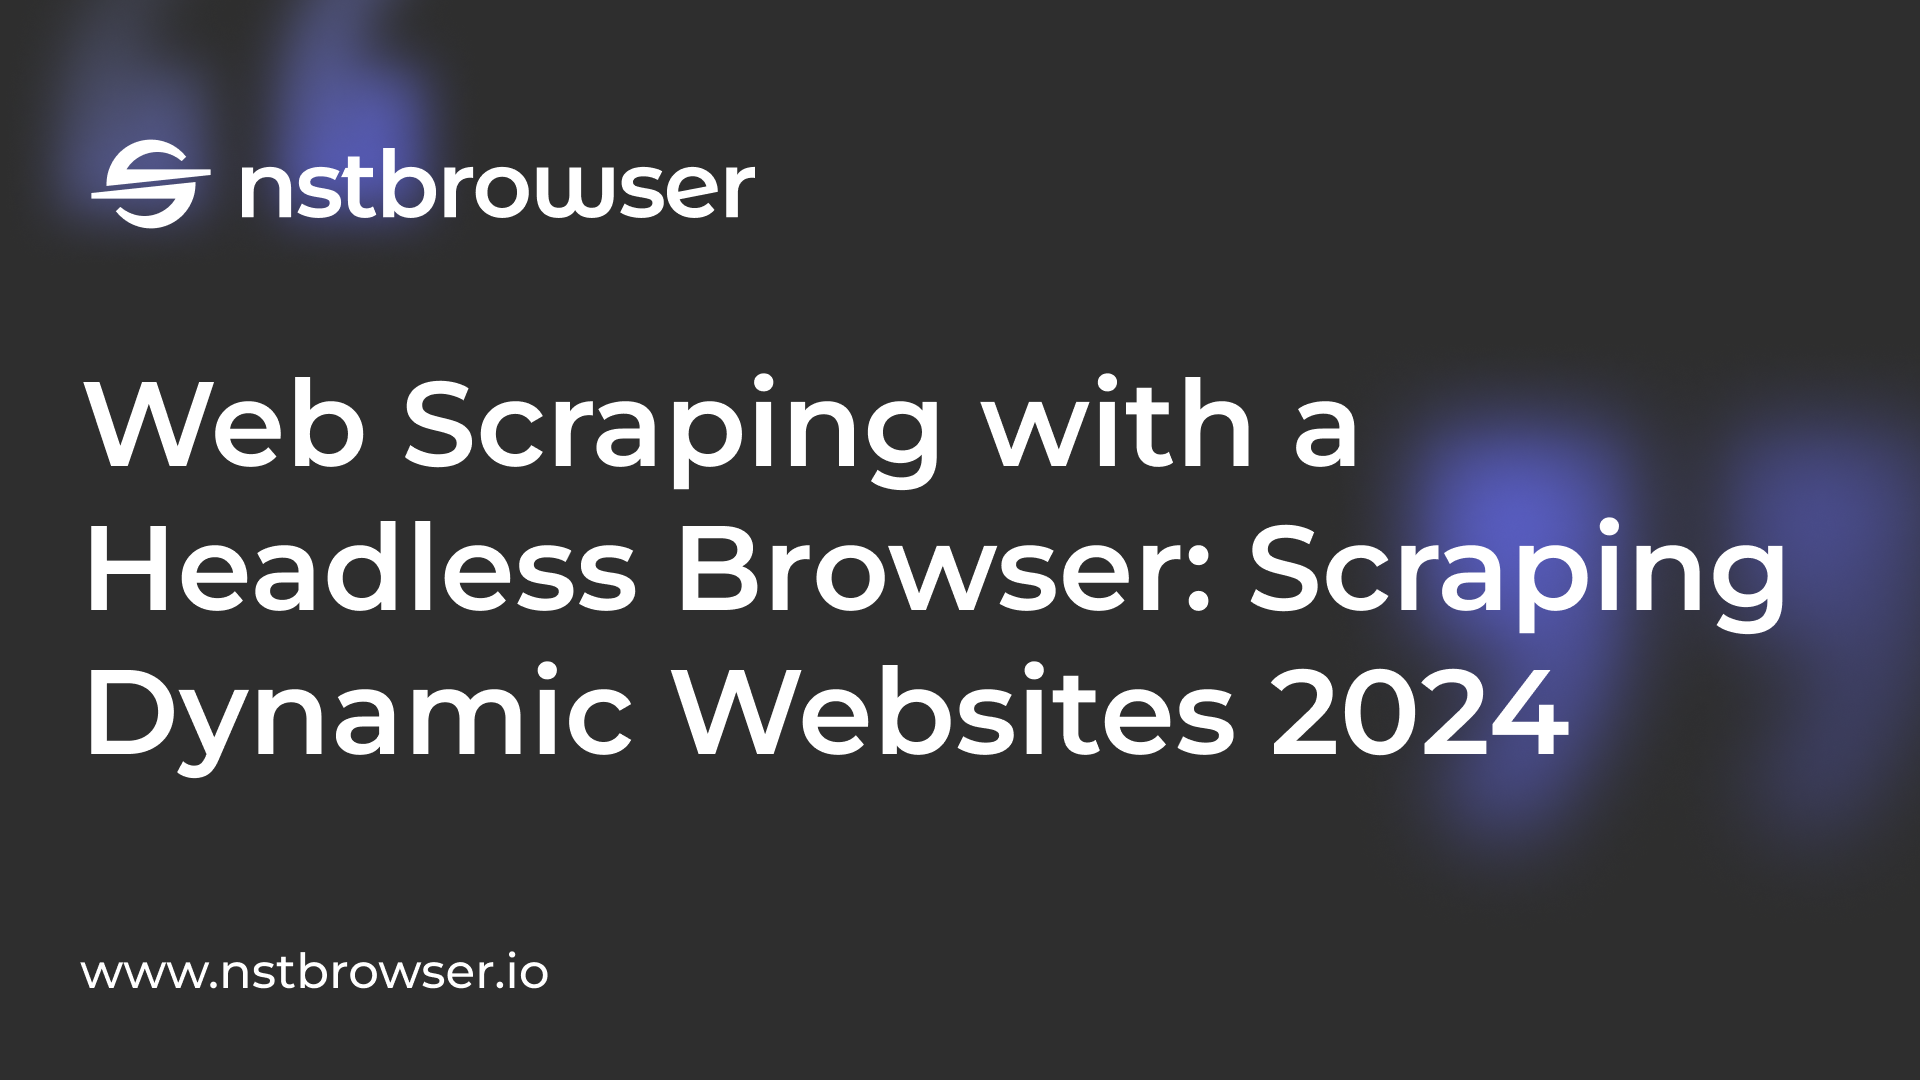 Web Scraping with a Headless Browser